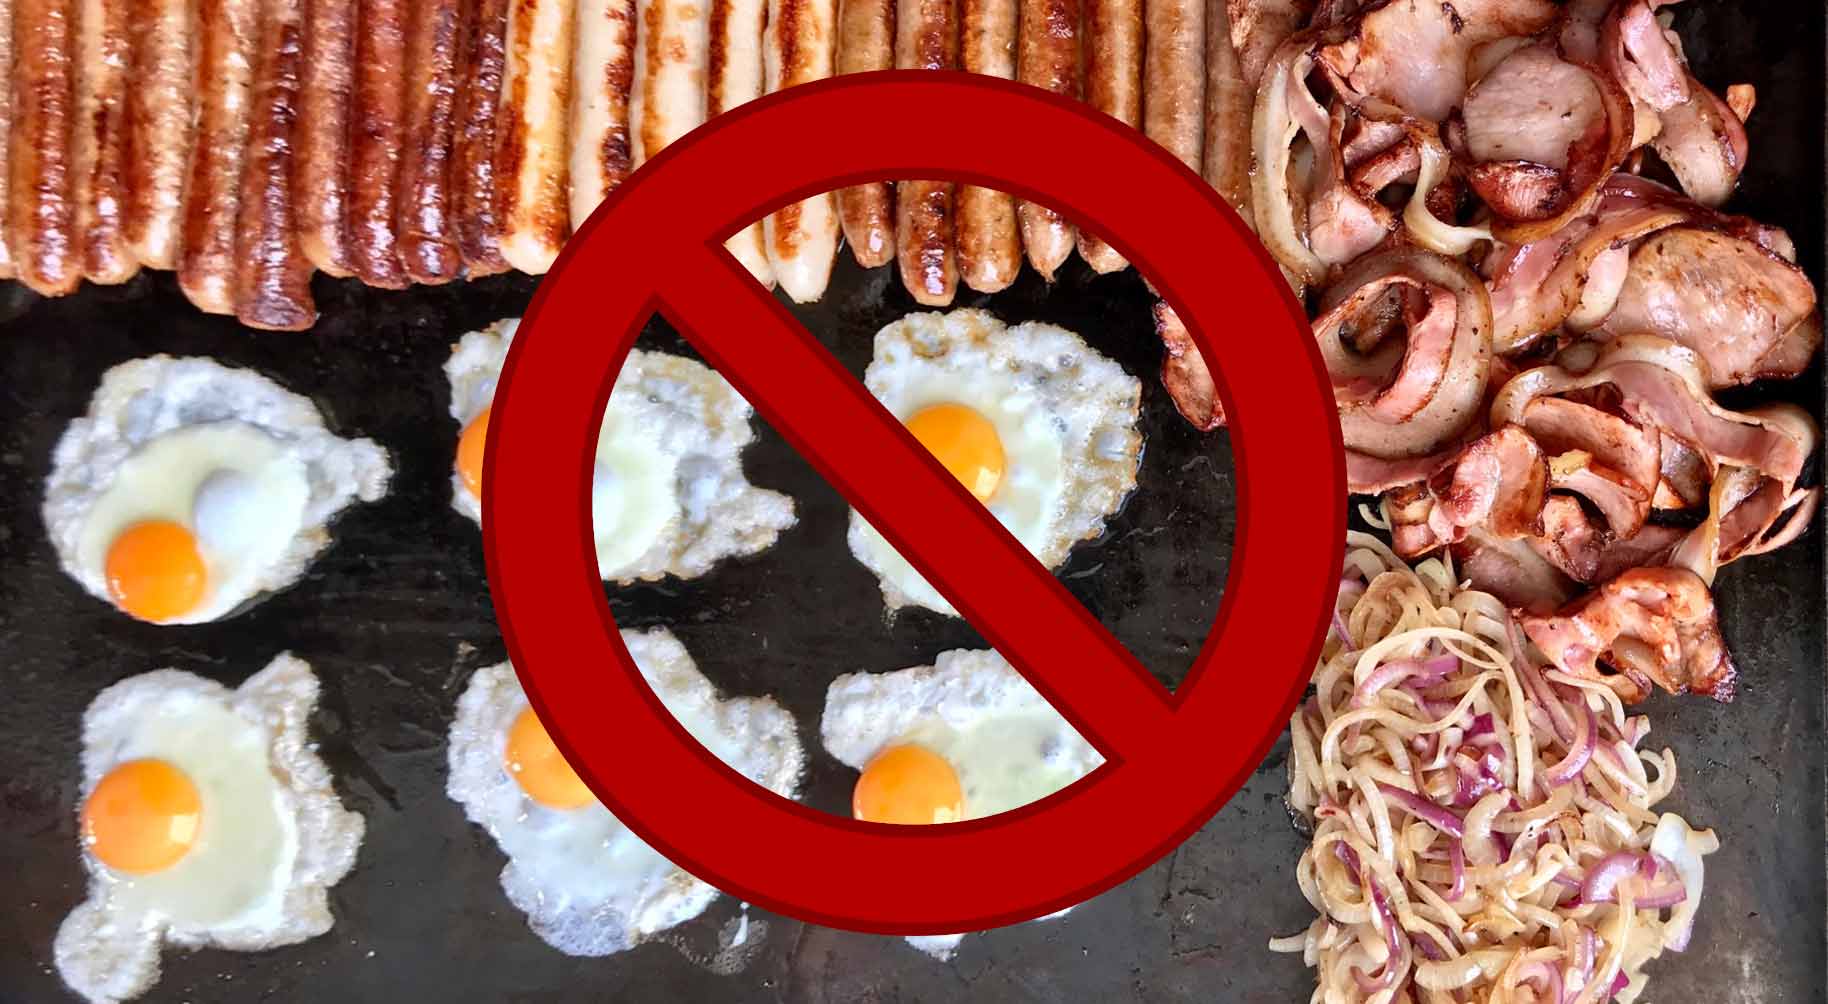 Breakfast of sausage, bacon, and fried eggs - with prohibition sign overlay